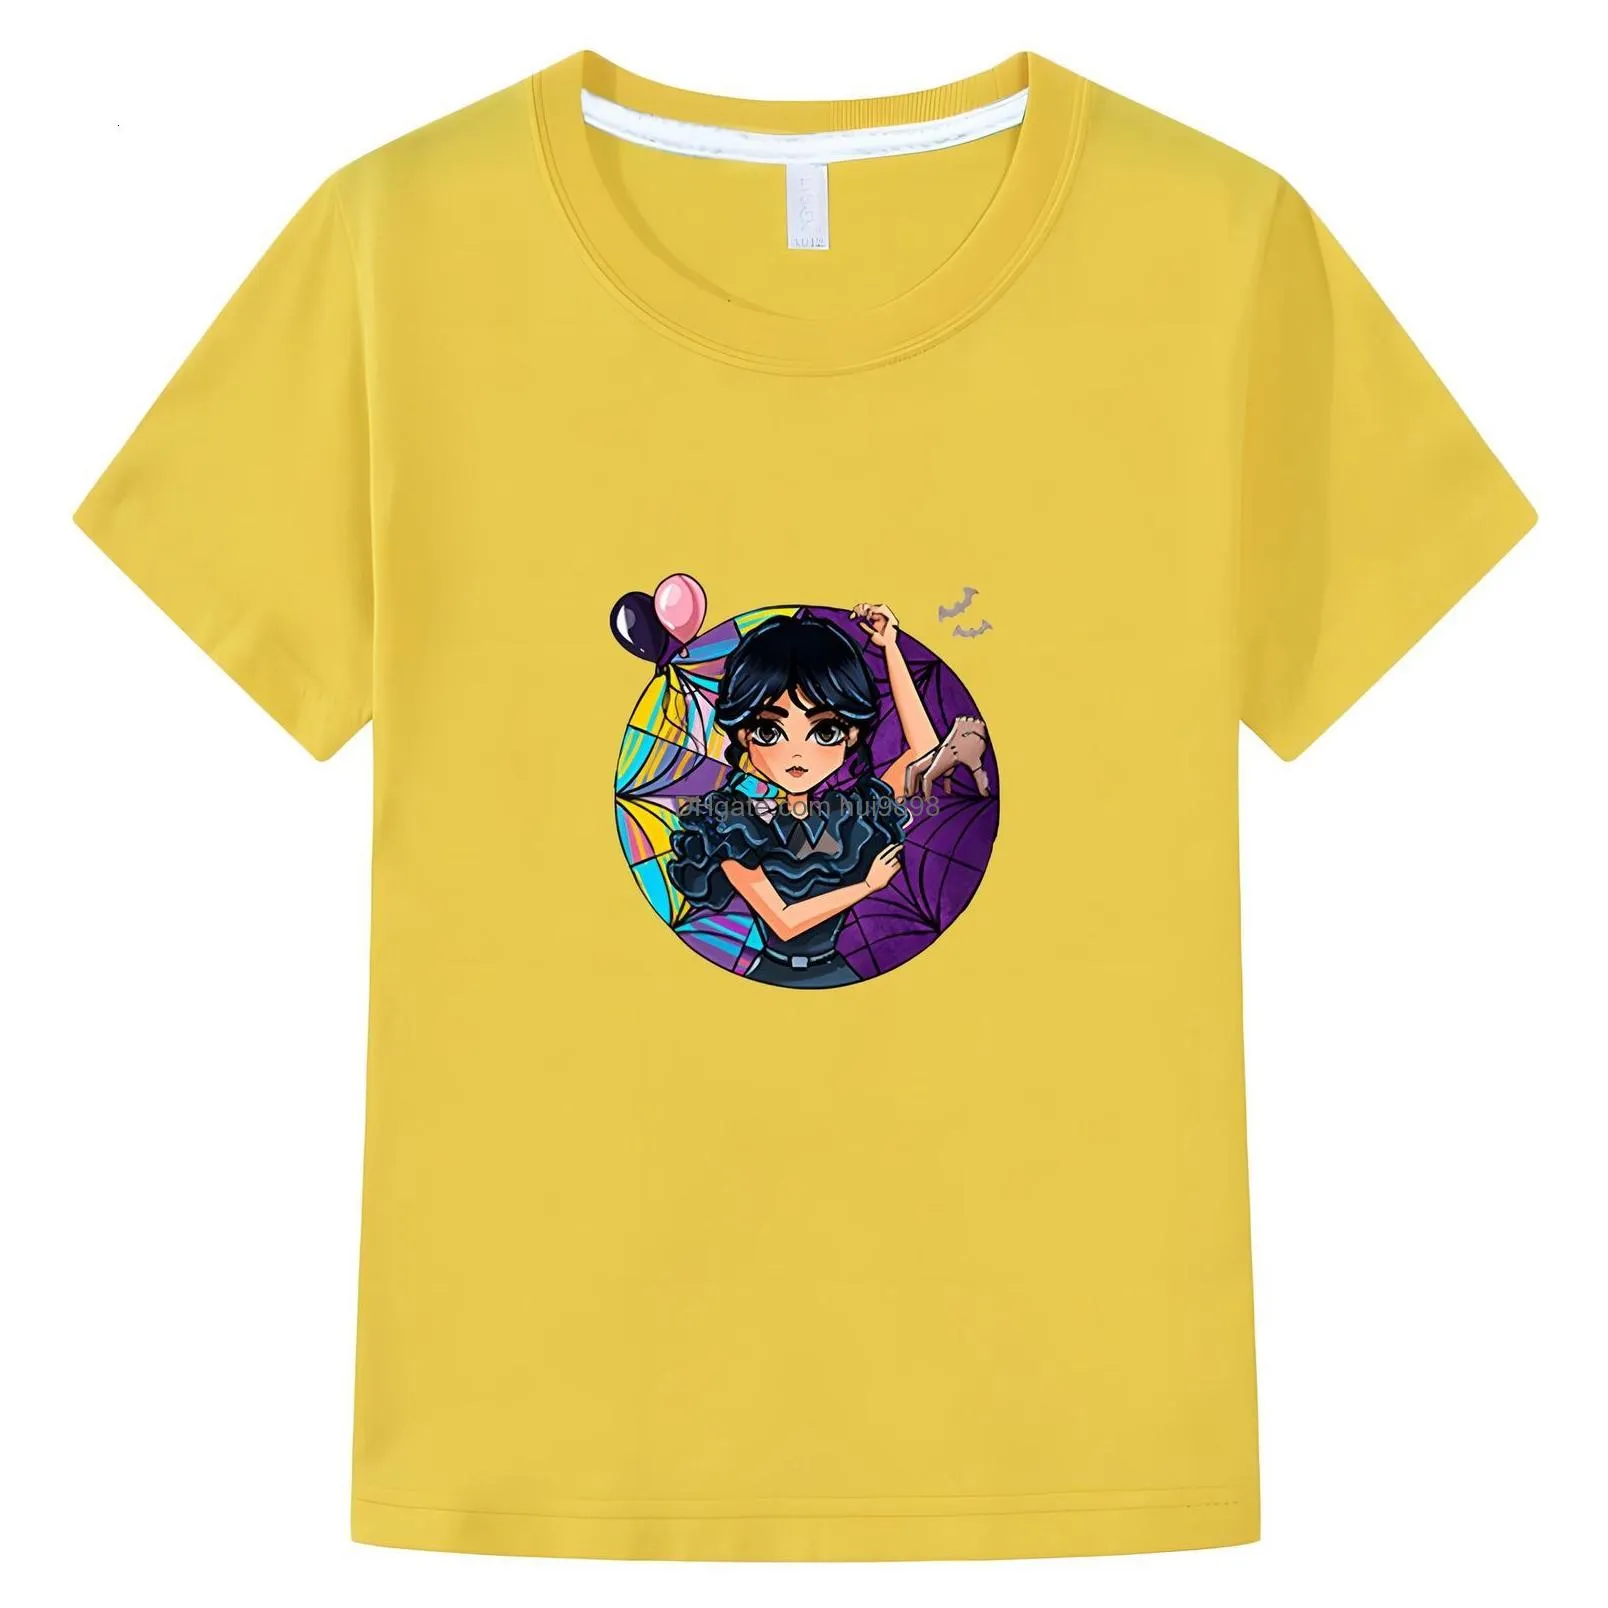 clothing sets wednesday kids anime cartoon tshirt 100cotton summer short sleeve y2k boys and girls clothes kids 230630